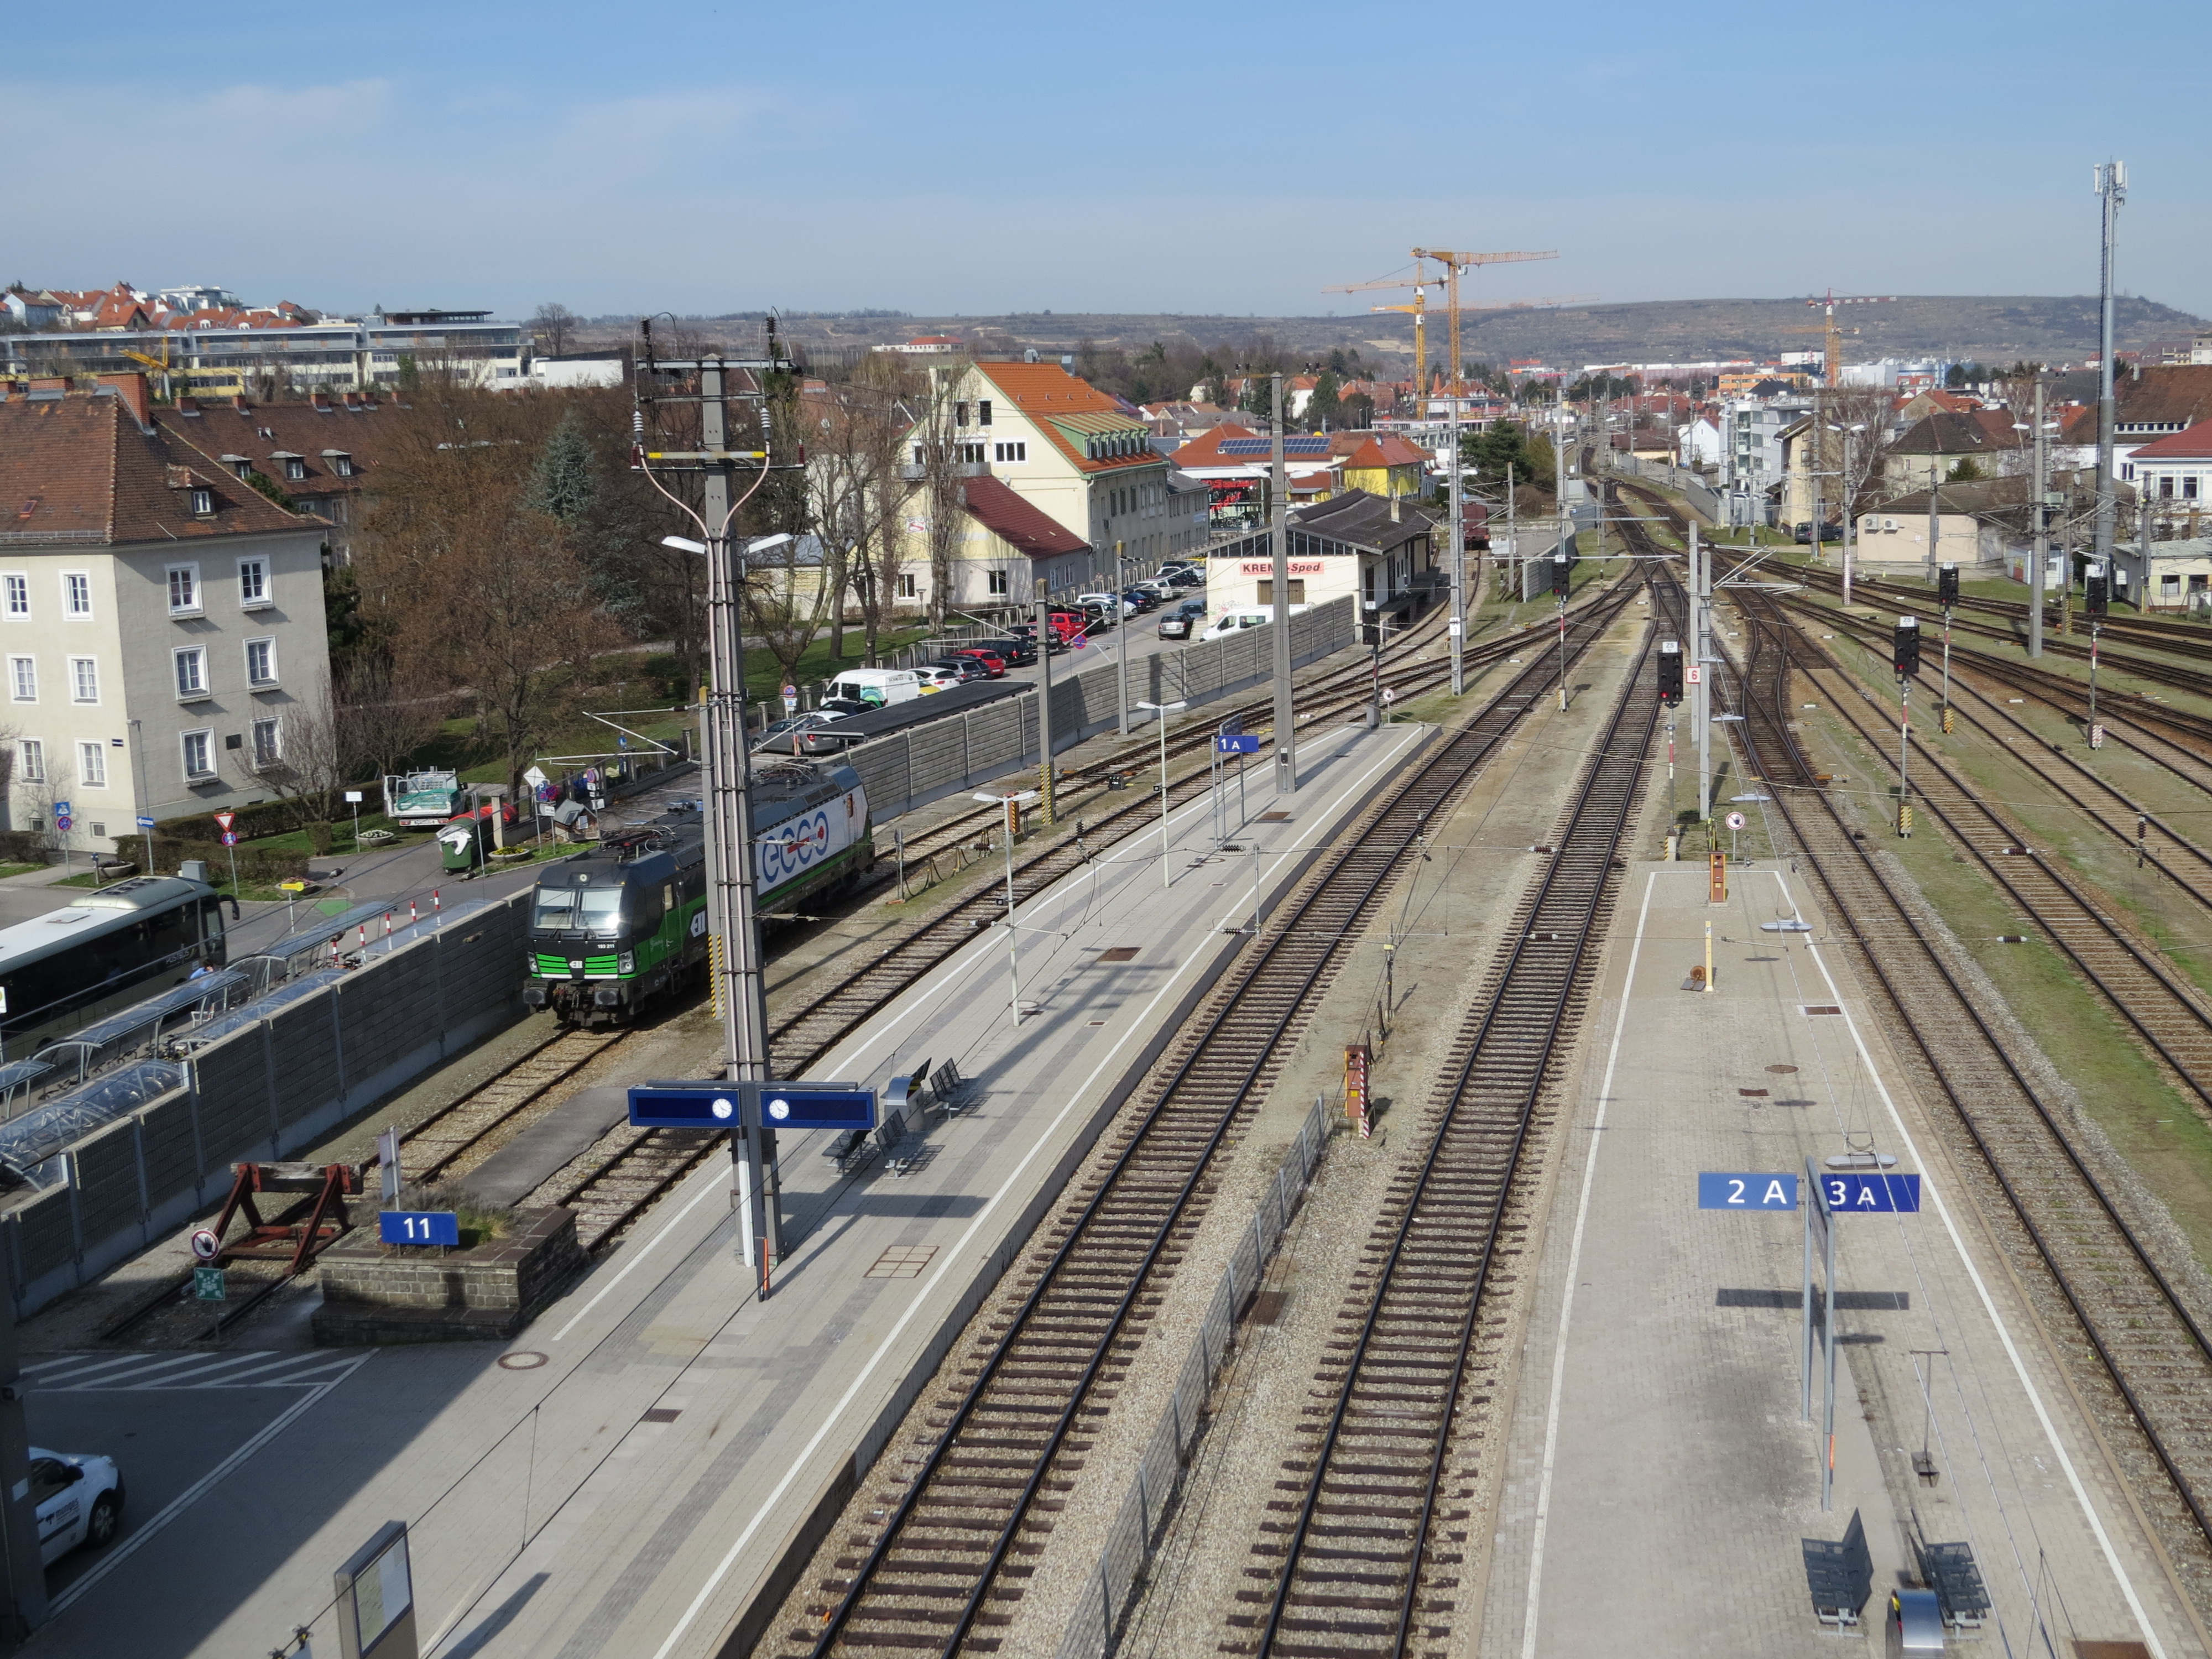 2018-04-03 (725) View from Park and Ride to Bahnhof Krems an der Donau